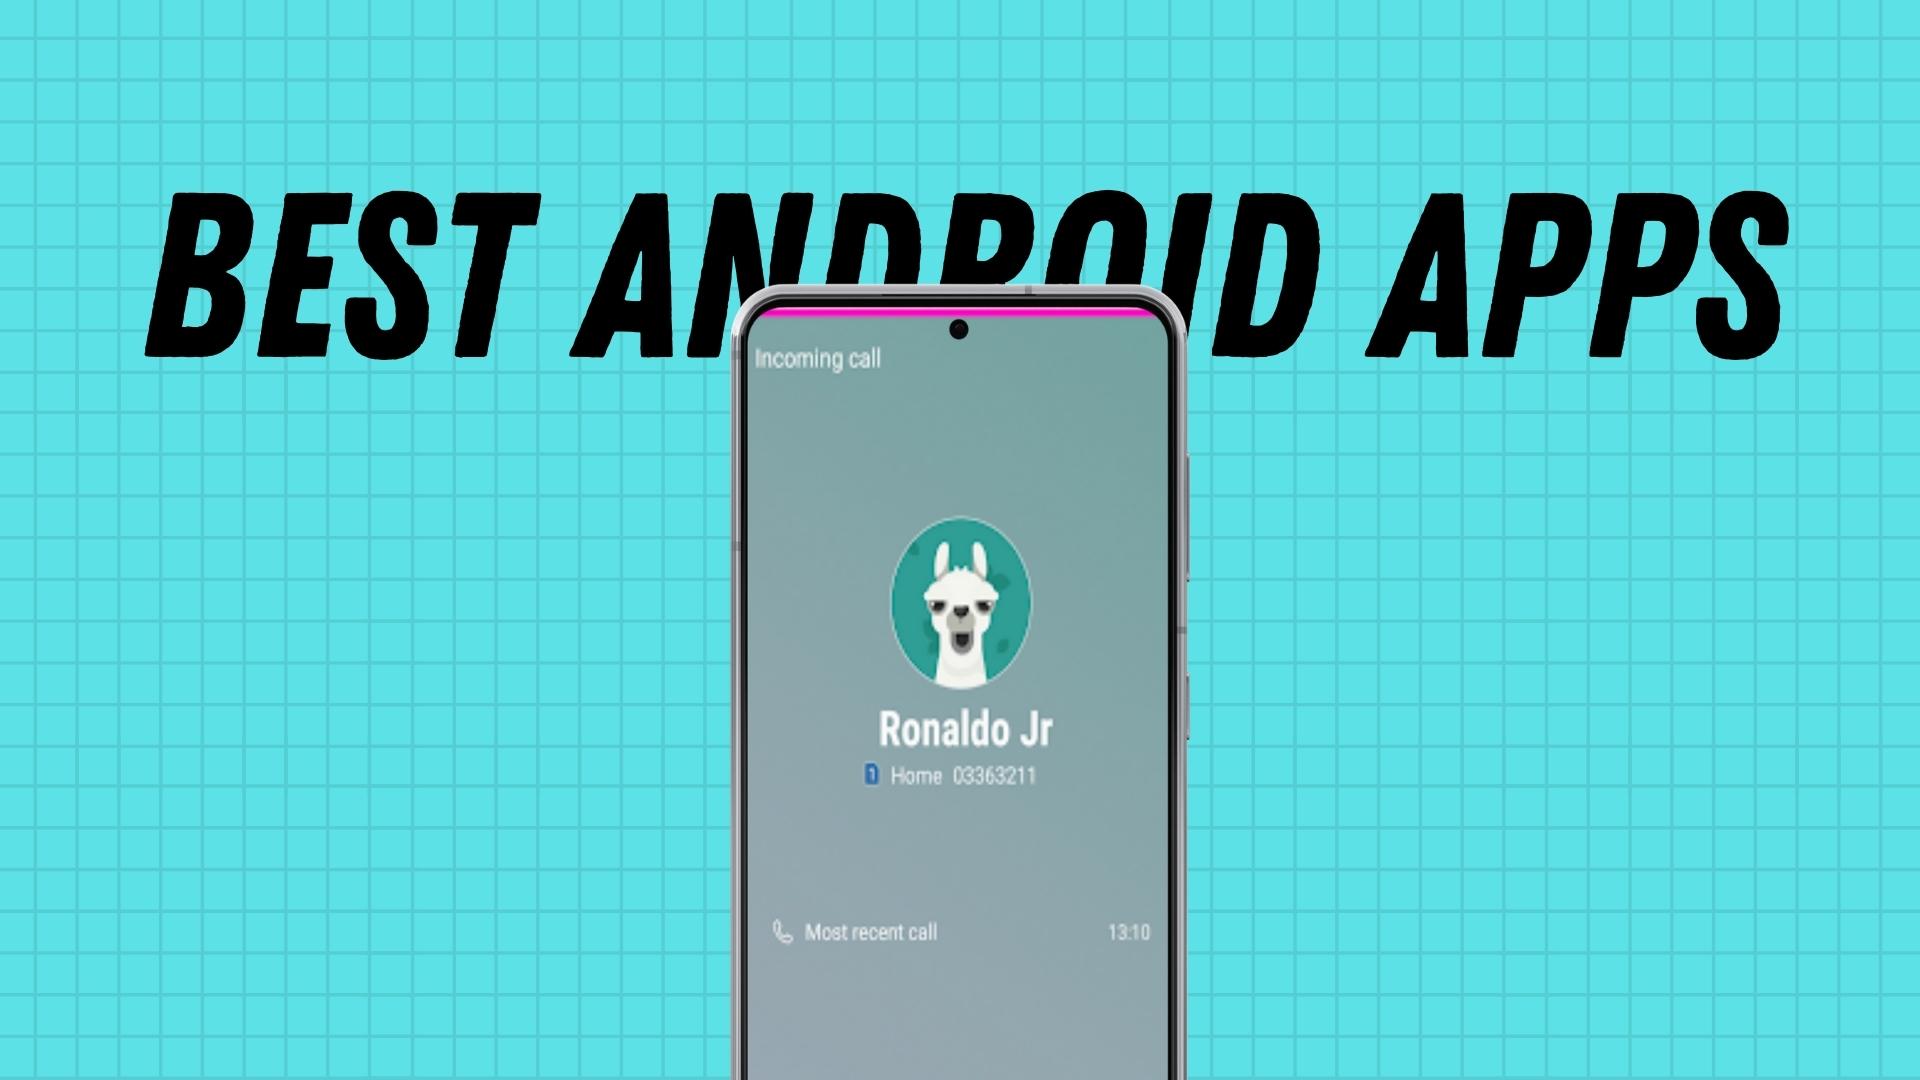 Top 10 Best Android Apps January 2022